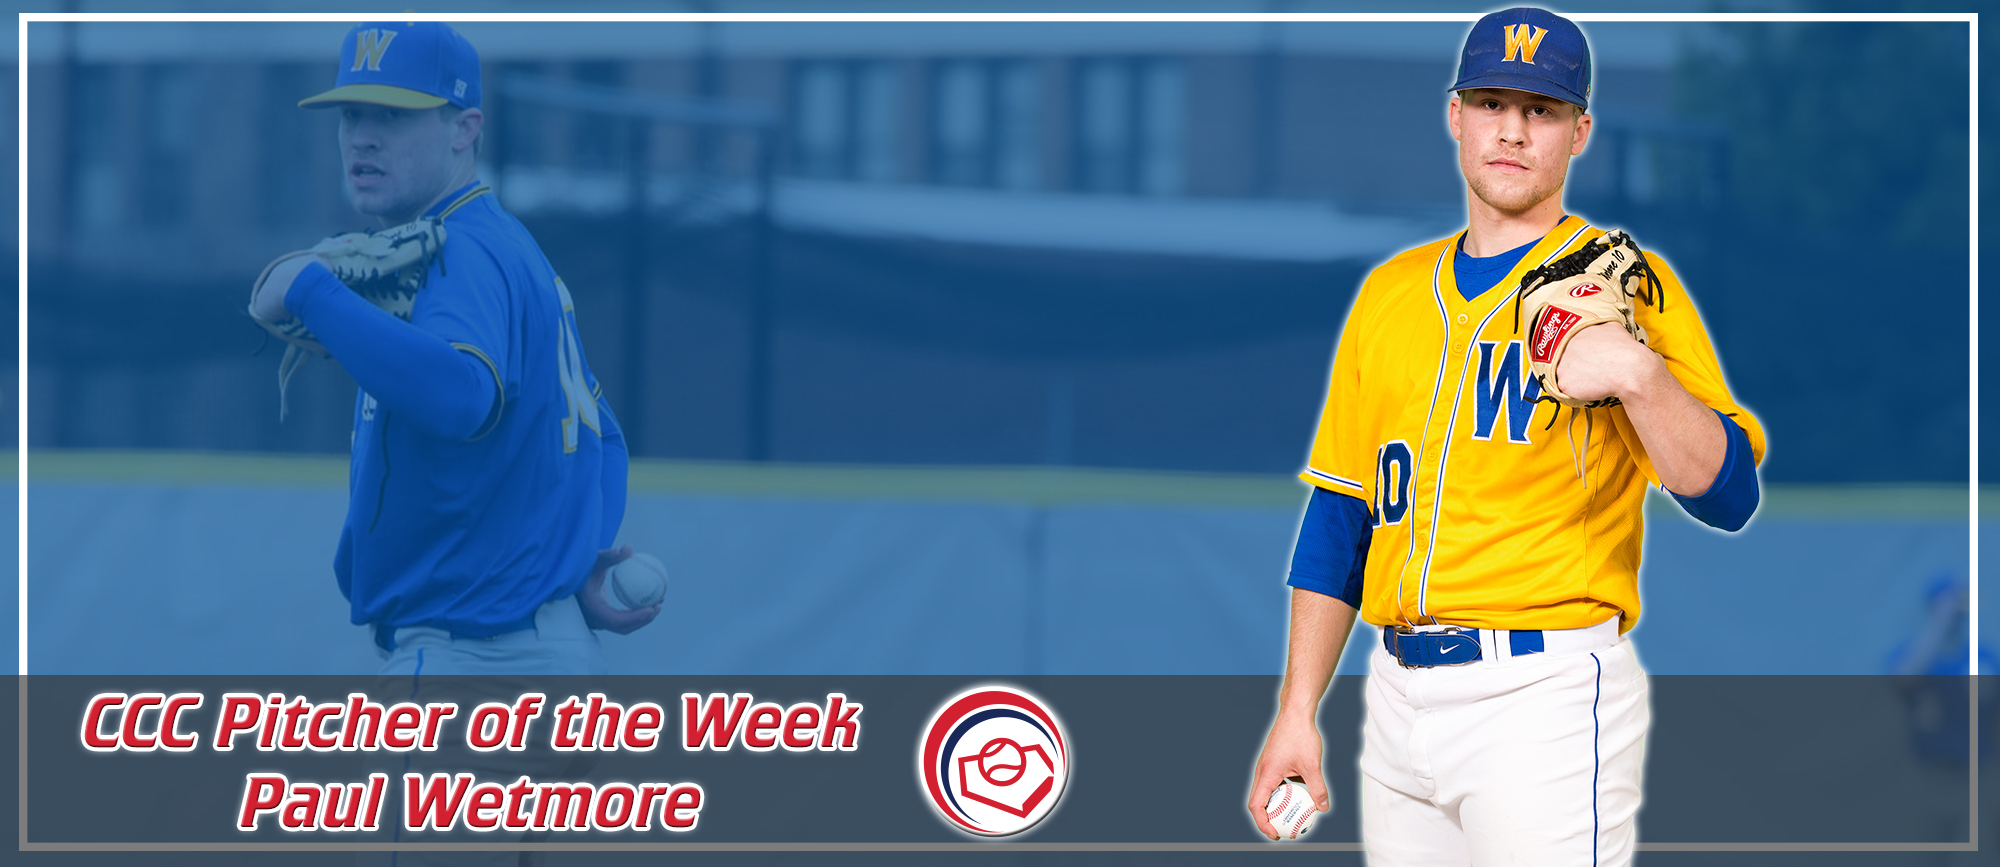 Paul Wetmore Named CCC Pitcher of the Week